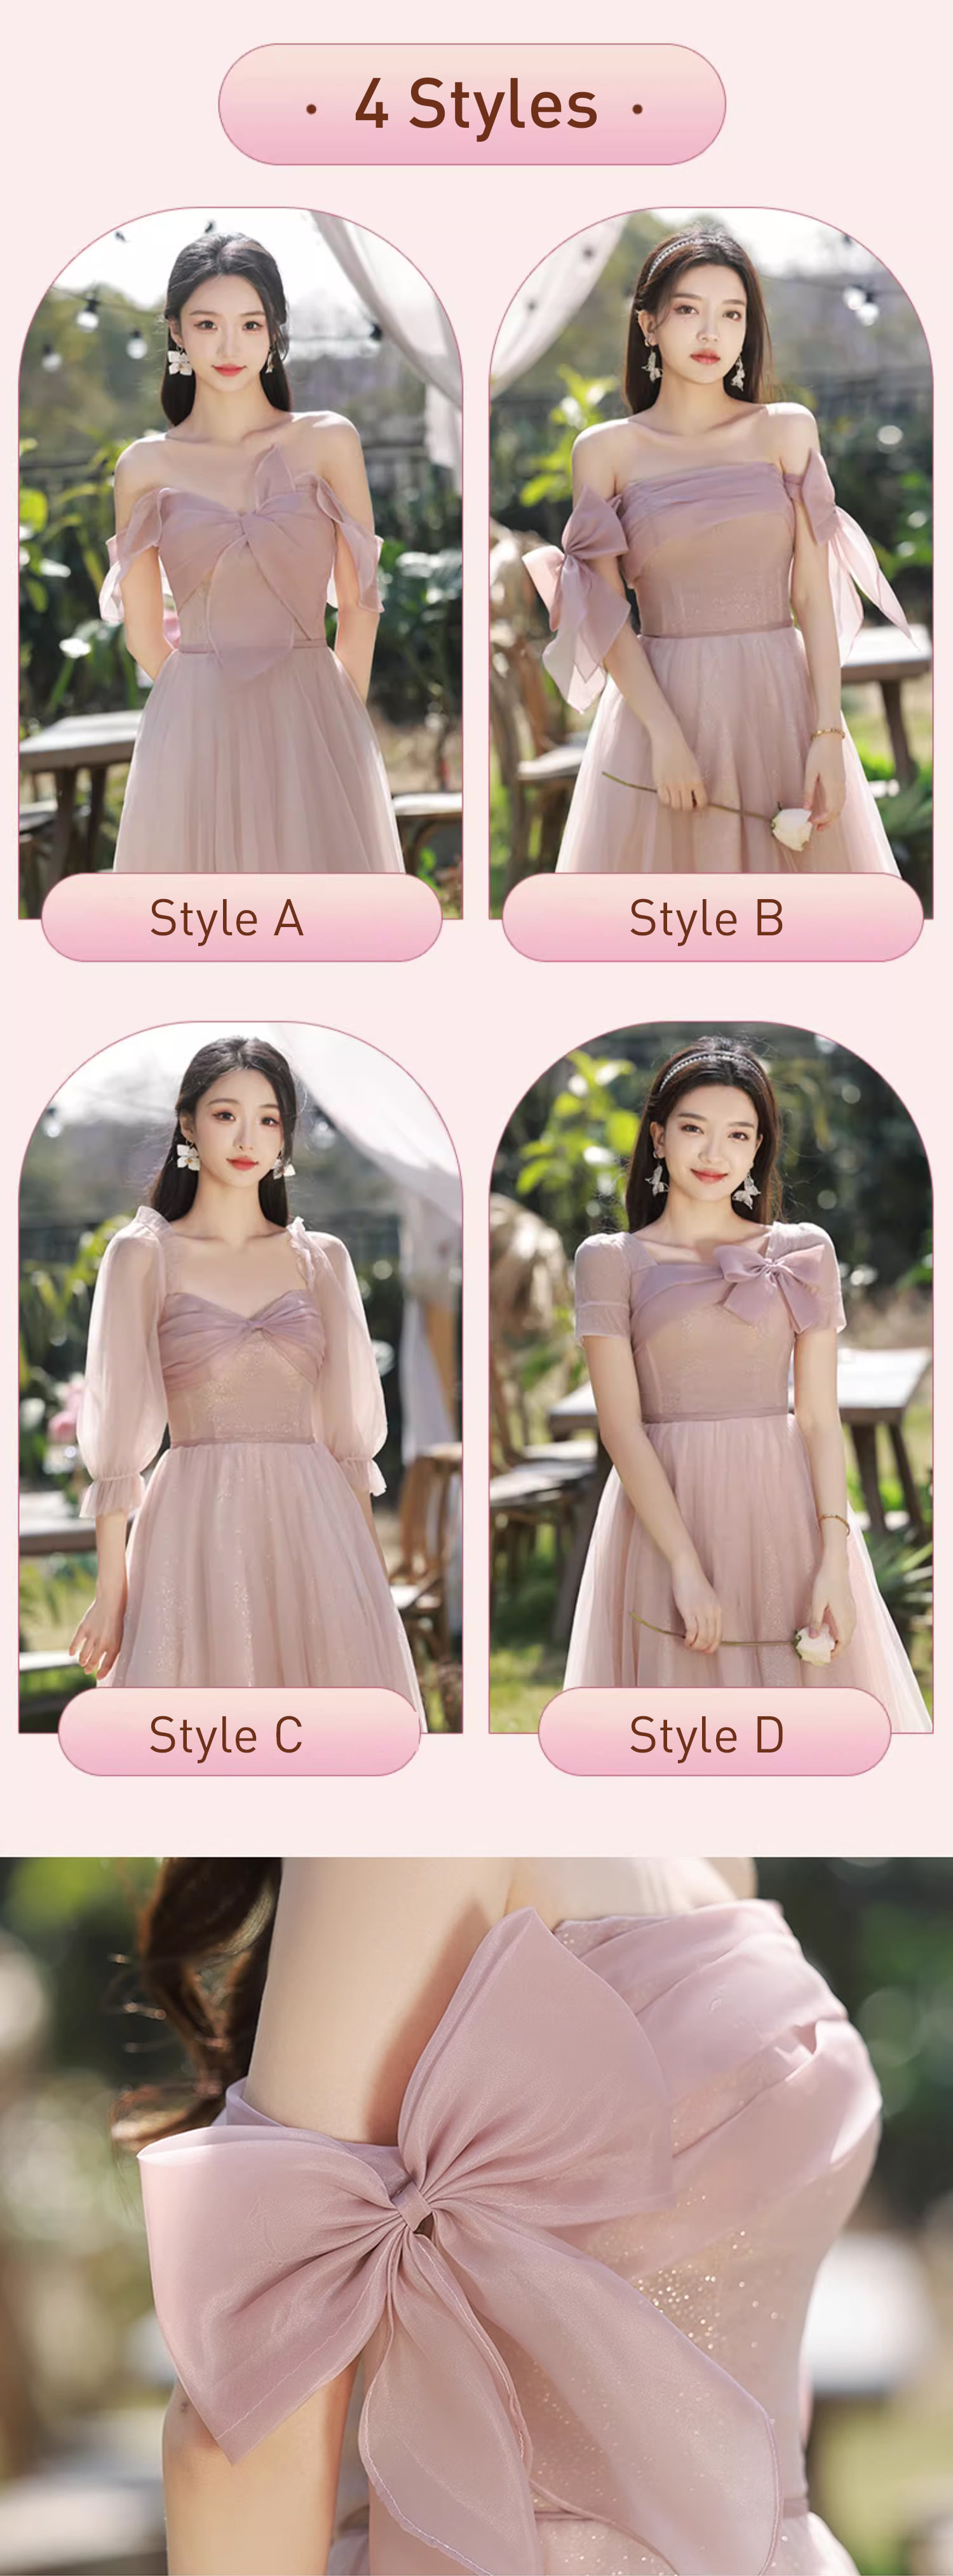 Elegant-Pink-Tulle-Slim-Fit-Bridesmaid-Wedding-Guest-Party-Maxi-Dress12